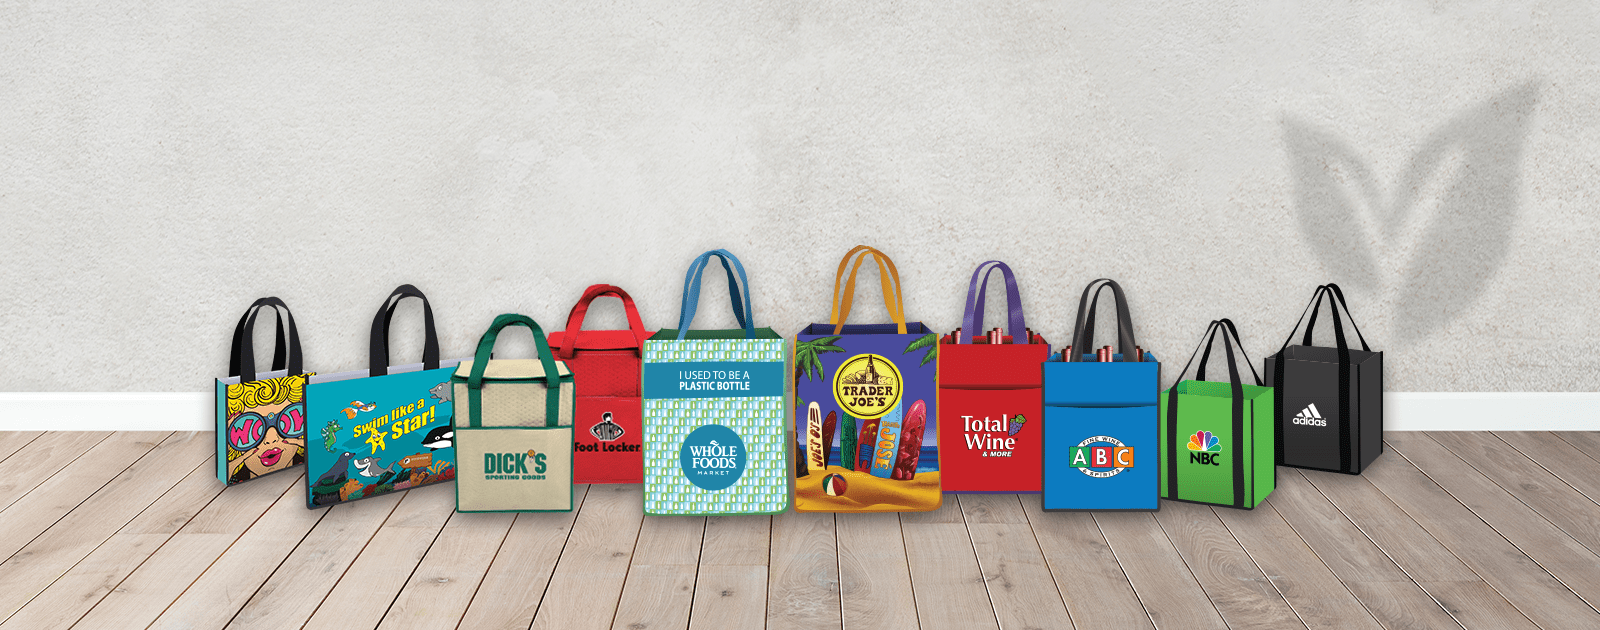 Reusable bags lined up together with unique custom logos and varying colors